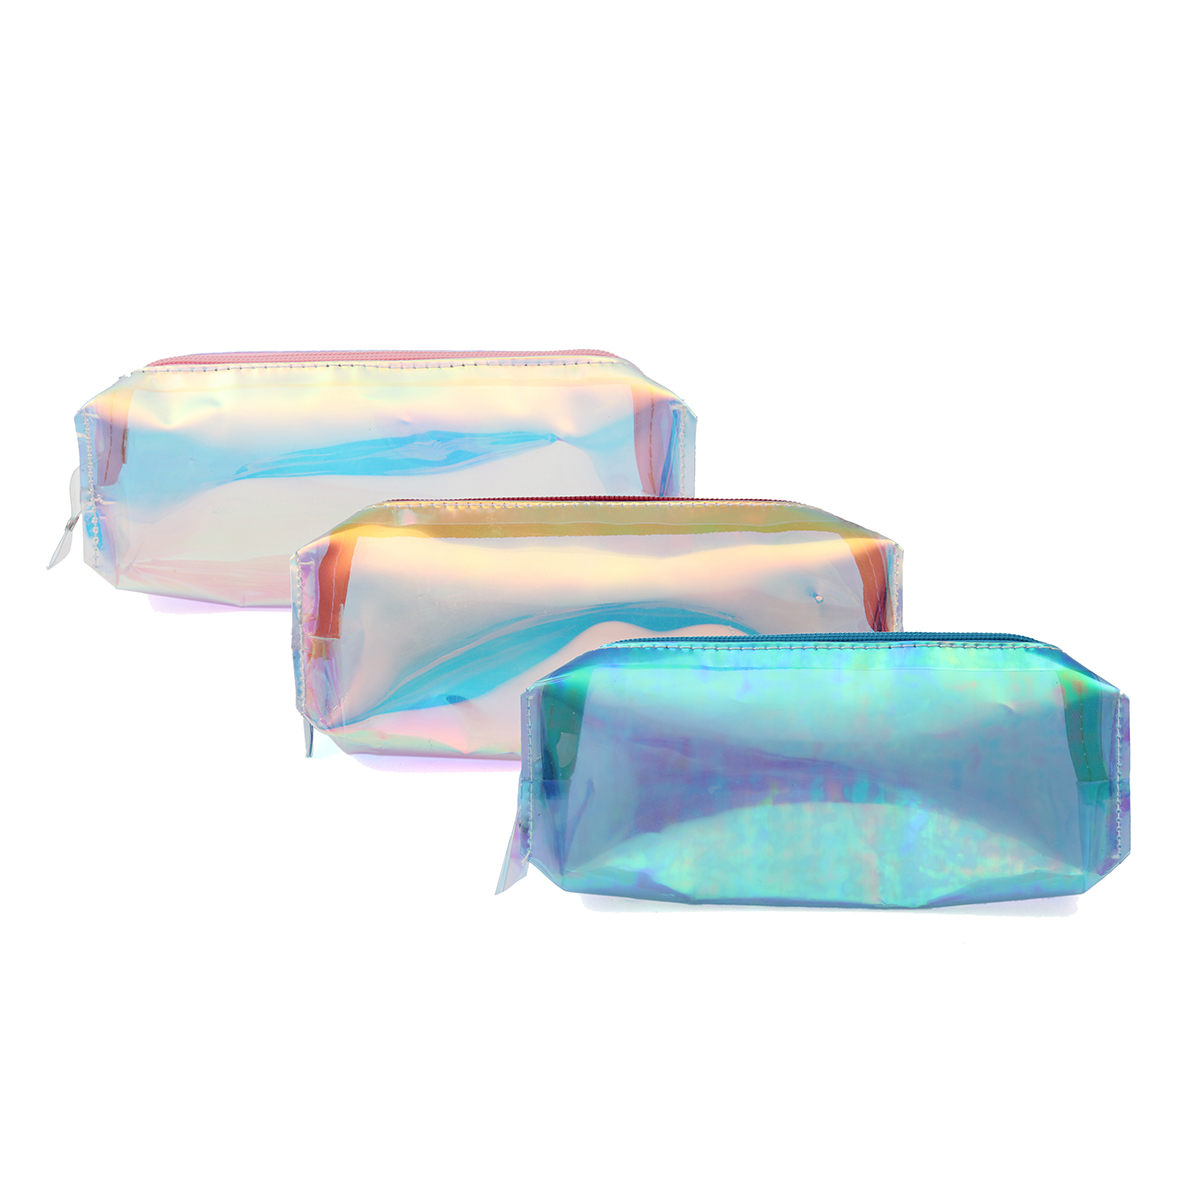 

Holographic Iridescent Laser Pencil Case Quality PU School for Girls Boy School Supplies Stationery Cute Pencil Box Pencil Bag